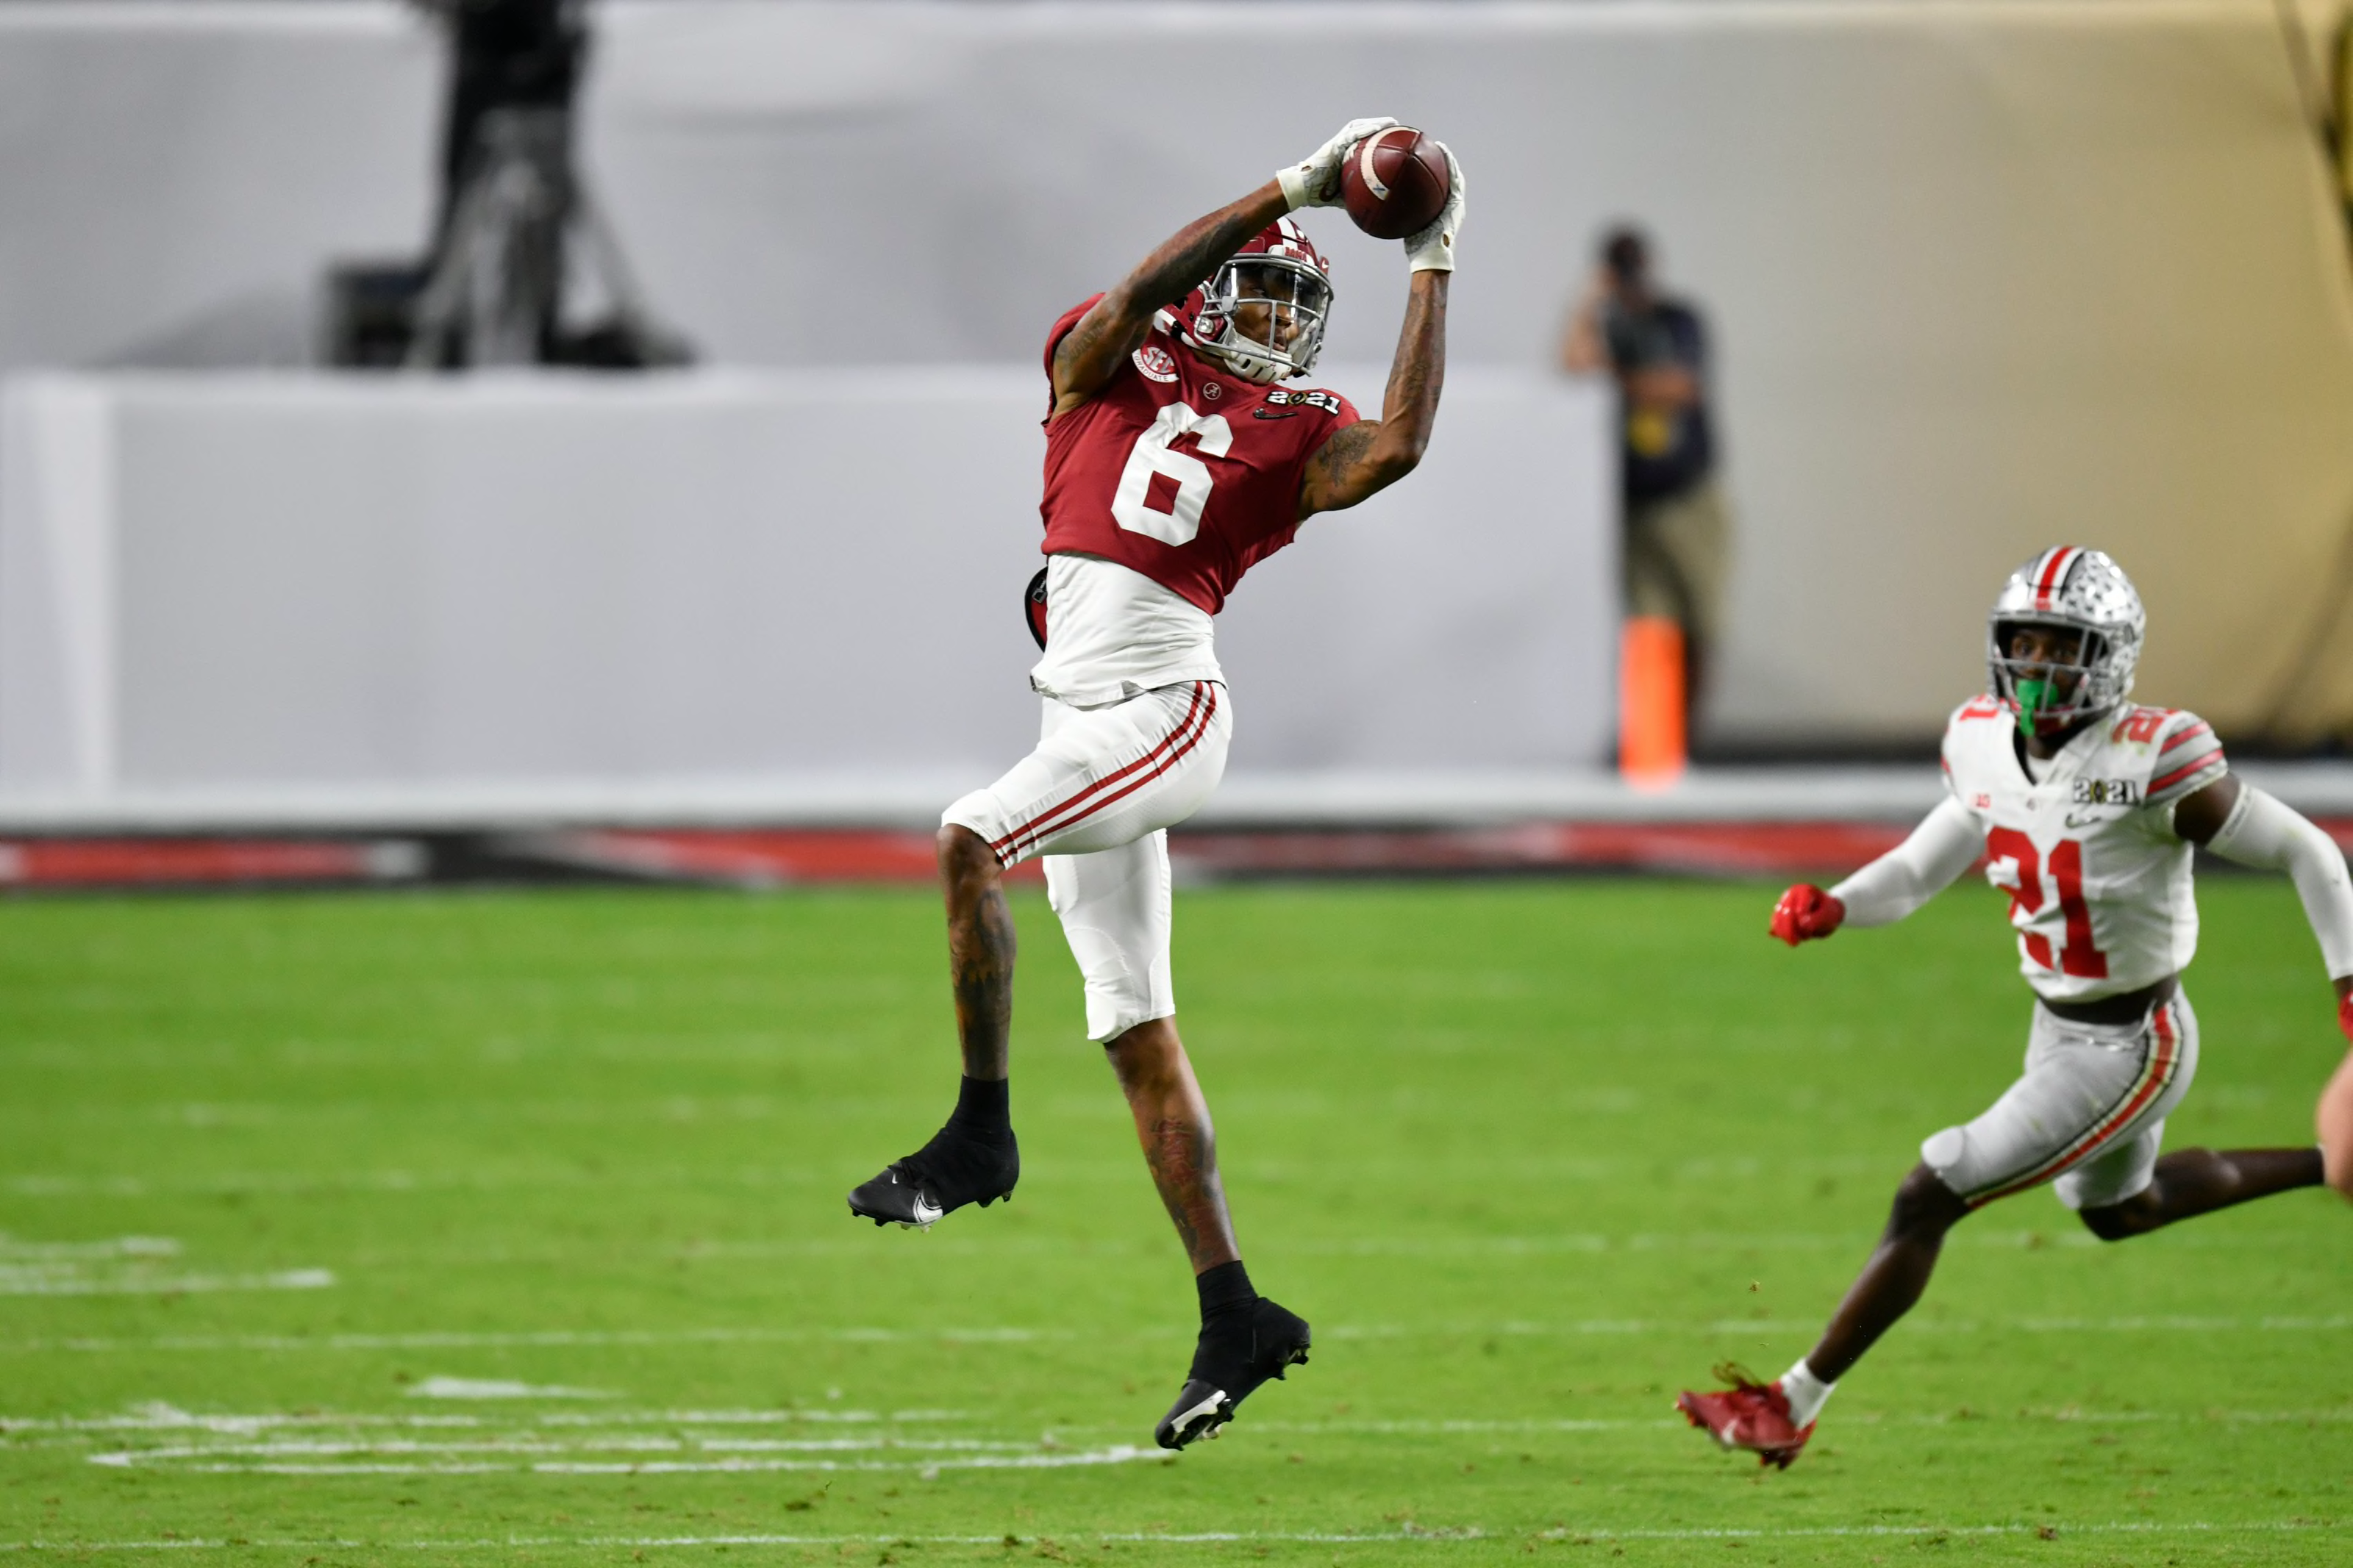 2021 Nfl Draft Players Whose Stock Rose From National Championship